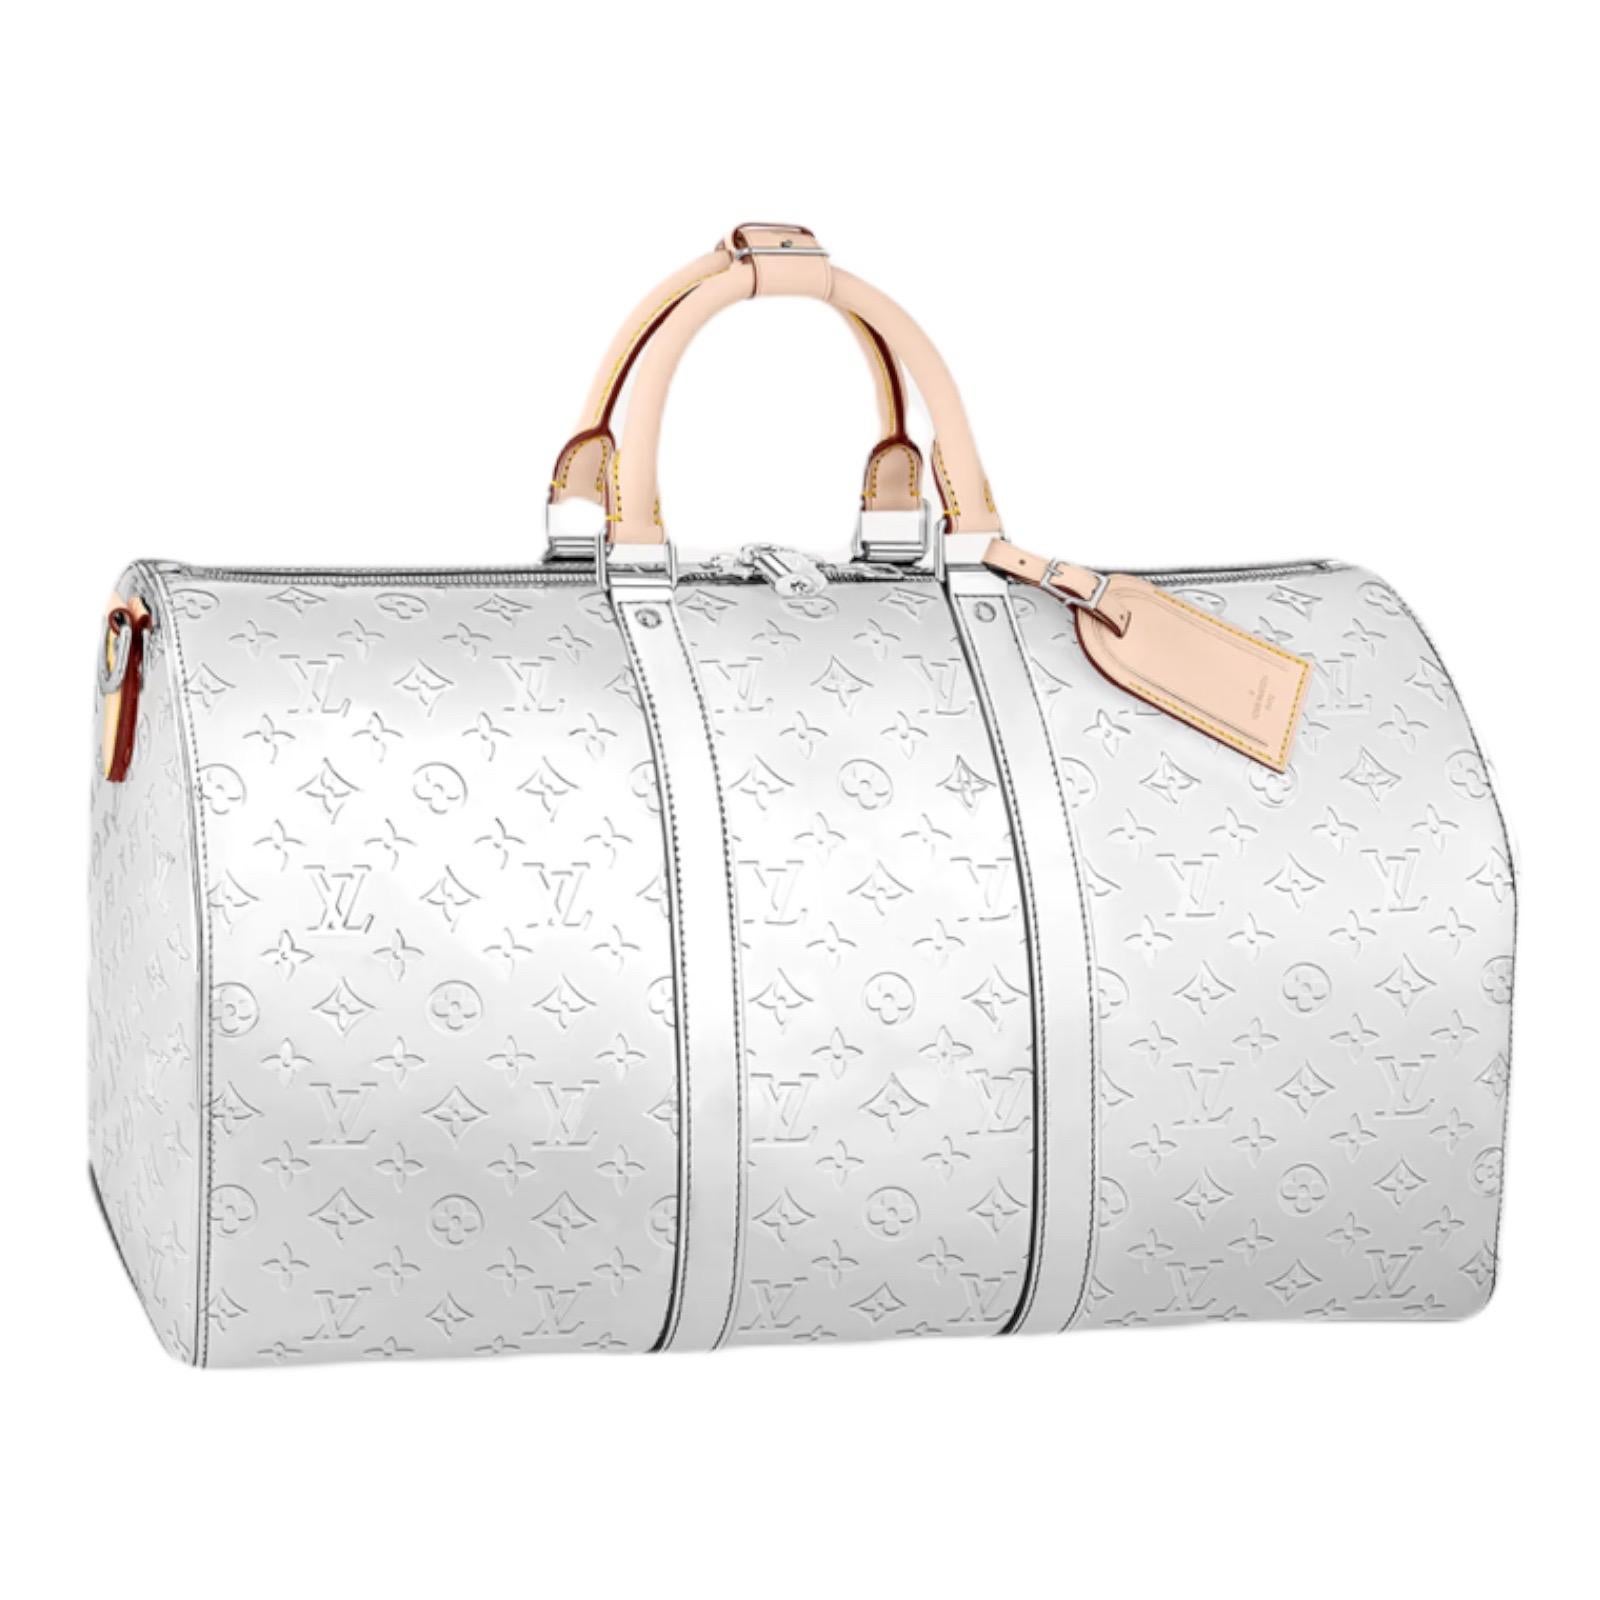 Brandnew Louis Vuitton Monogram Mirror Canvas Keepall 50 Bag

Sold out available with months-long waiting list

Fresh from store, full set with dustbag and box, never worn.

This Keepall Bandoulière 50 bag is made from Virgil Abloh’s new reflective